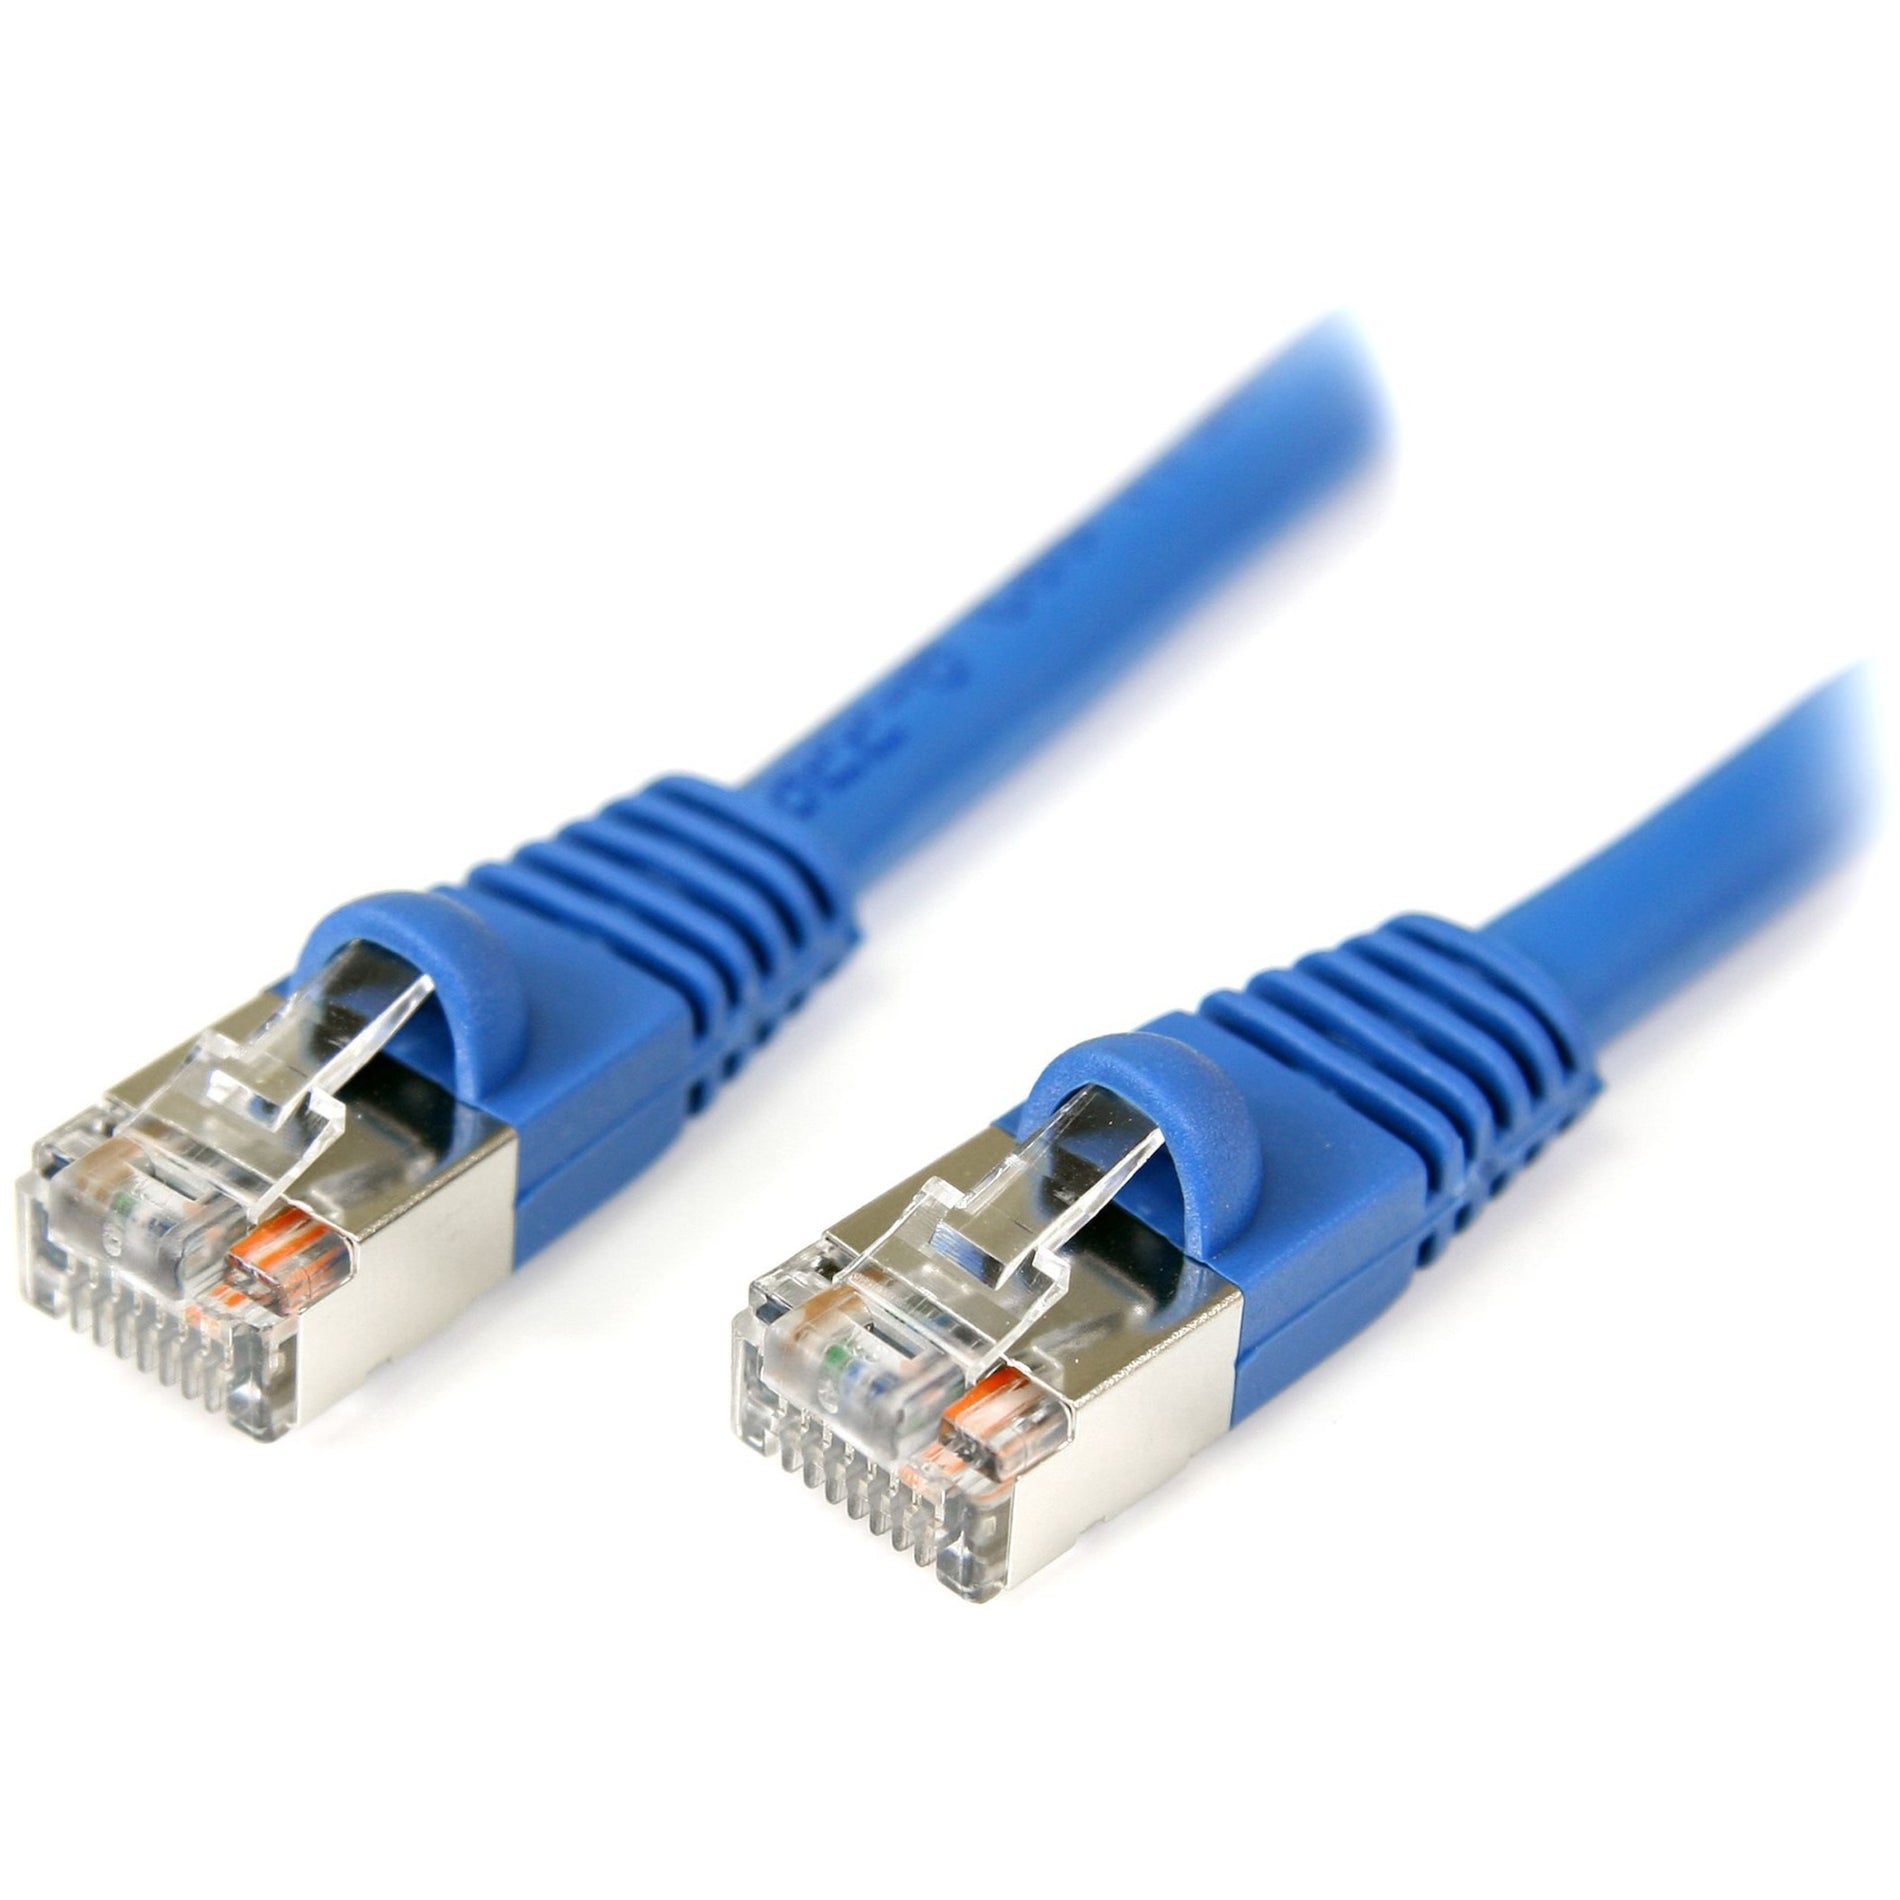 StarTech.com S45PATCH100B 100 ft Blue Snagless Shielded Cat5e Patch Cable, Molded, Flexible, EMI/RF Protection, Gold Plated Connectors